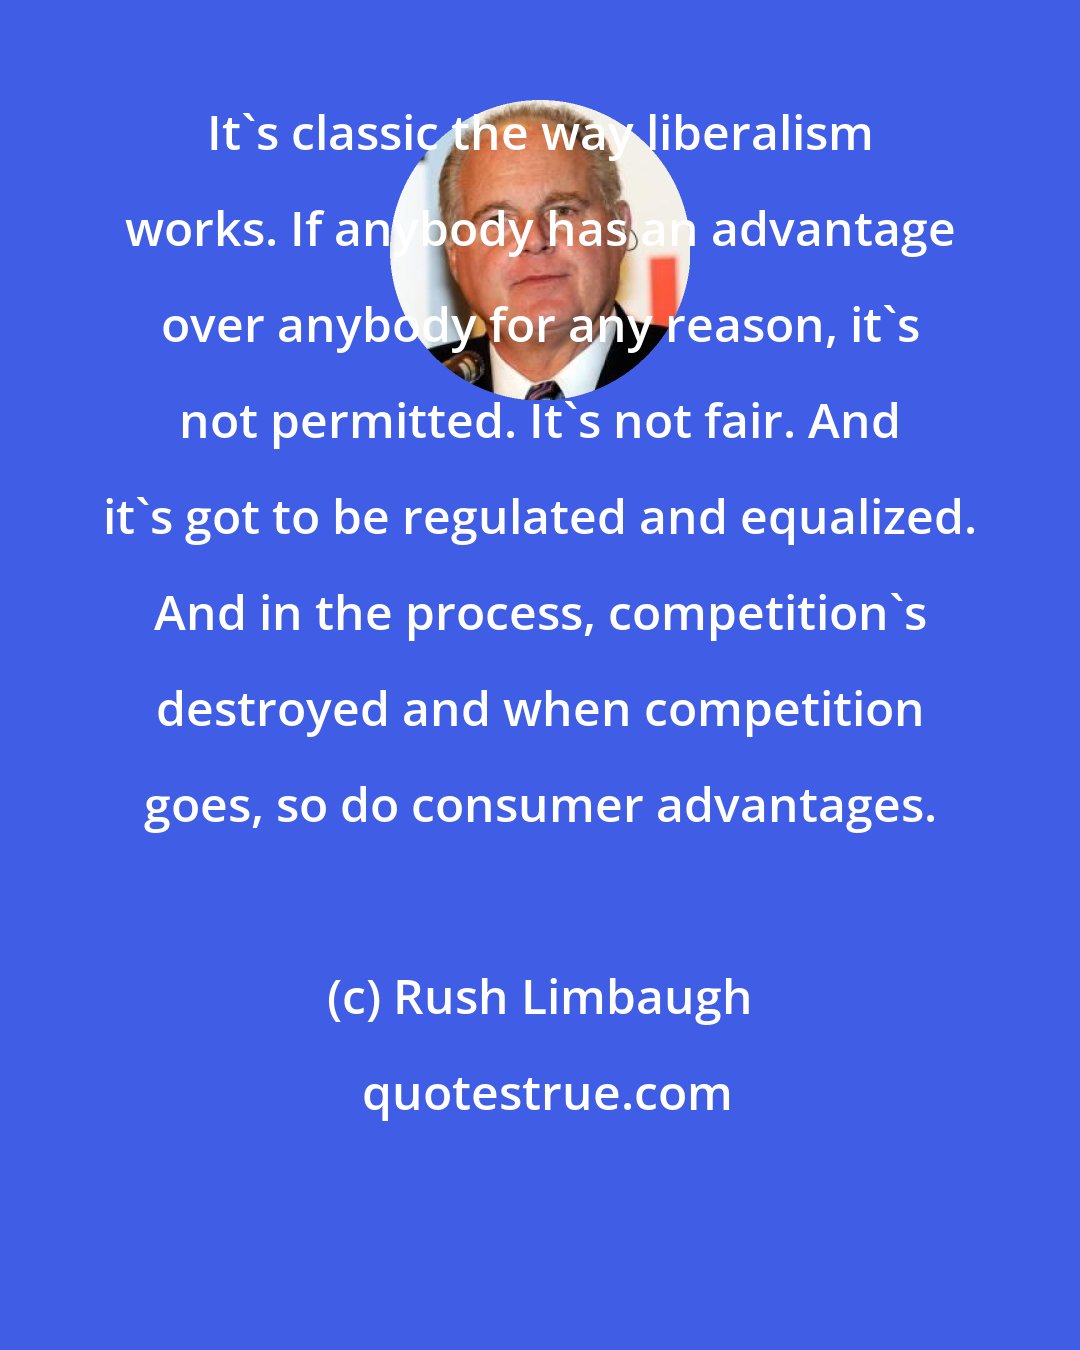 Rush Limbaugh: It's classic the way liberalism works. If anybody has an advantage over anybody for any reason, it's not permitted. It's not fair. And it's got to be regulated and equalized. And in the process, competition's destroyed and when competition goes, so do consumer advantages.